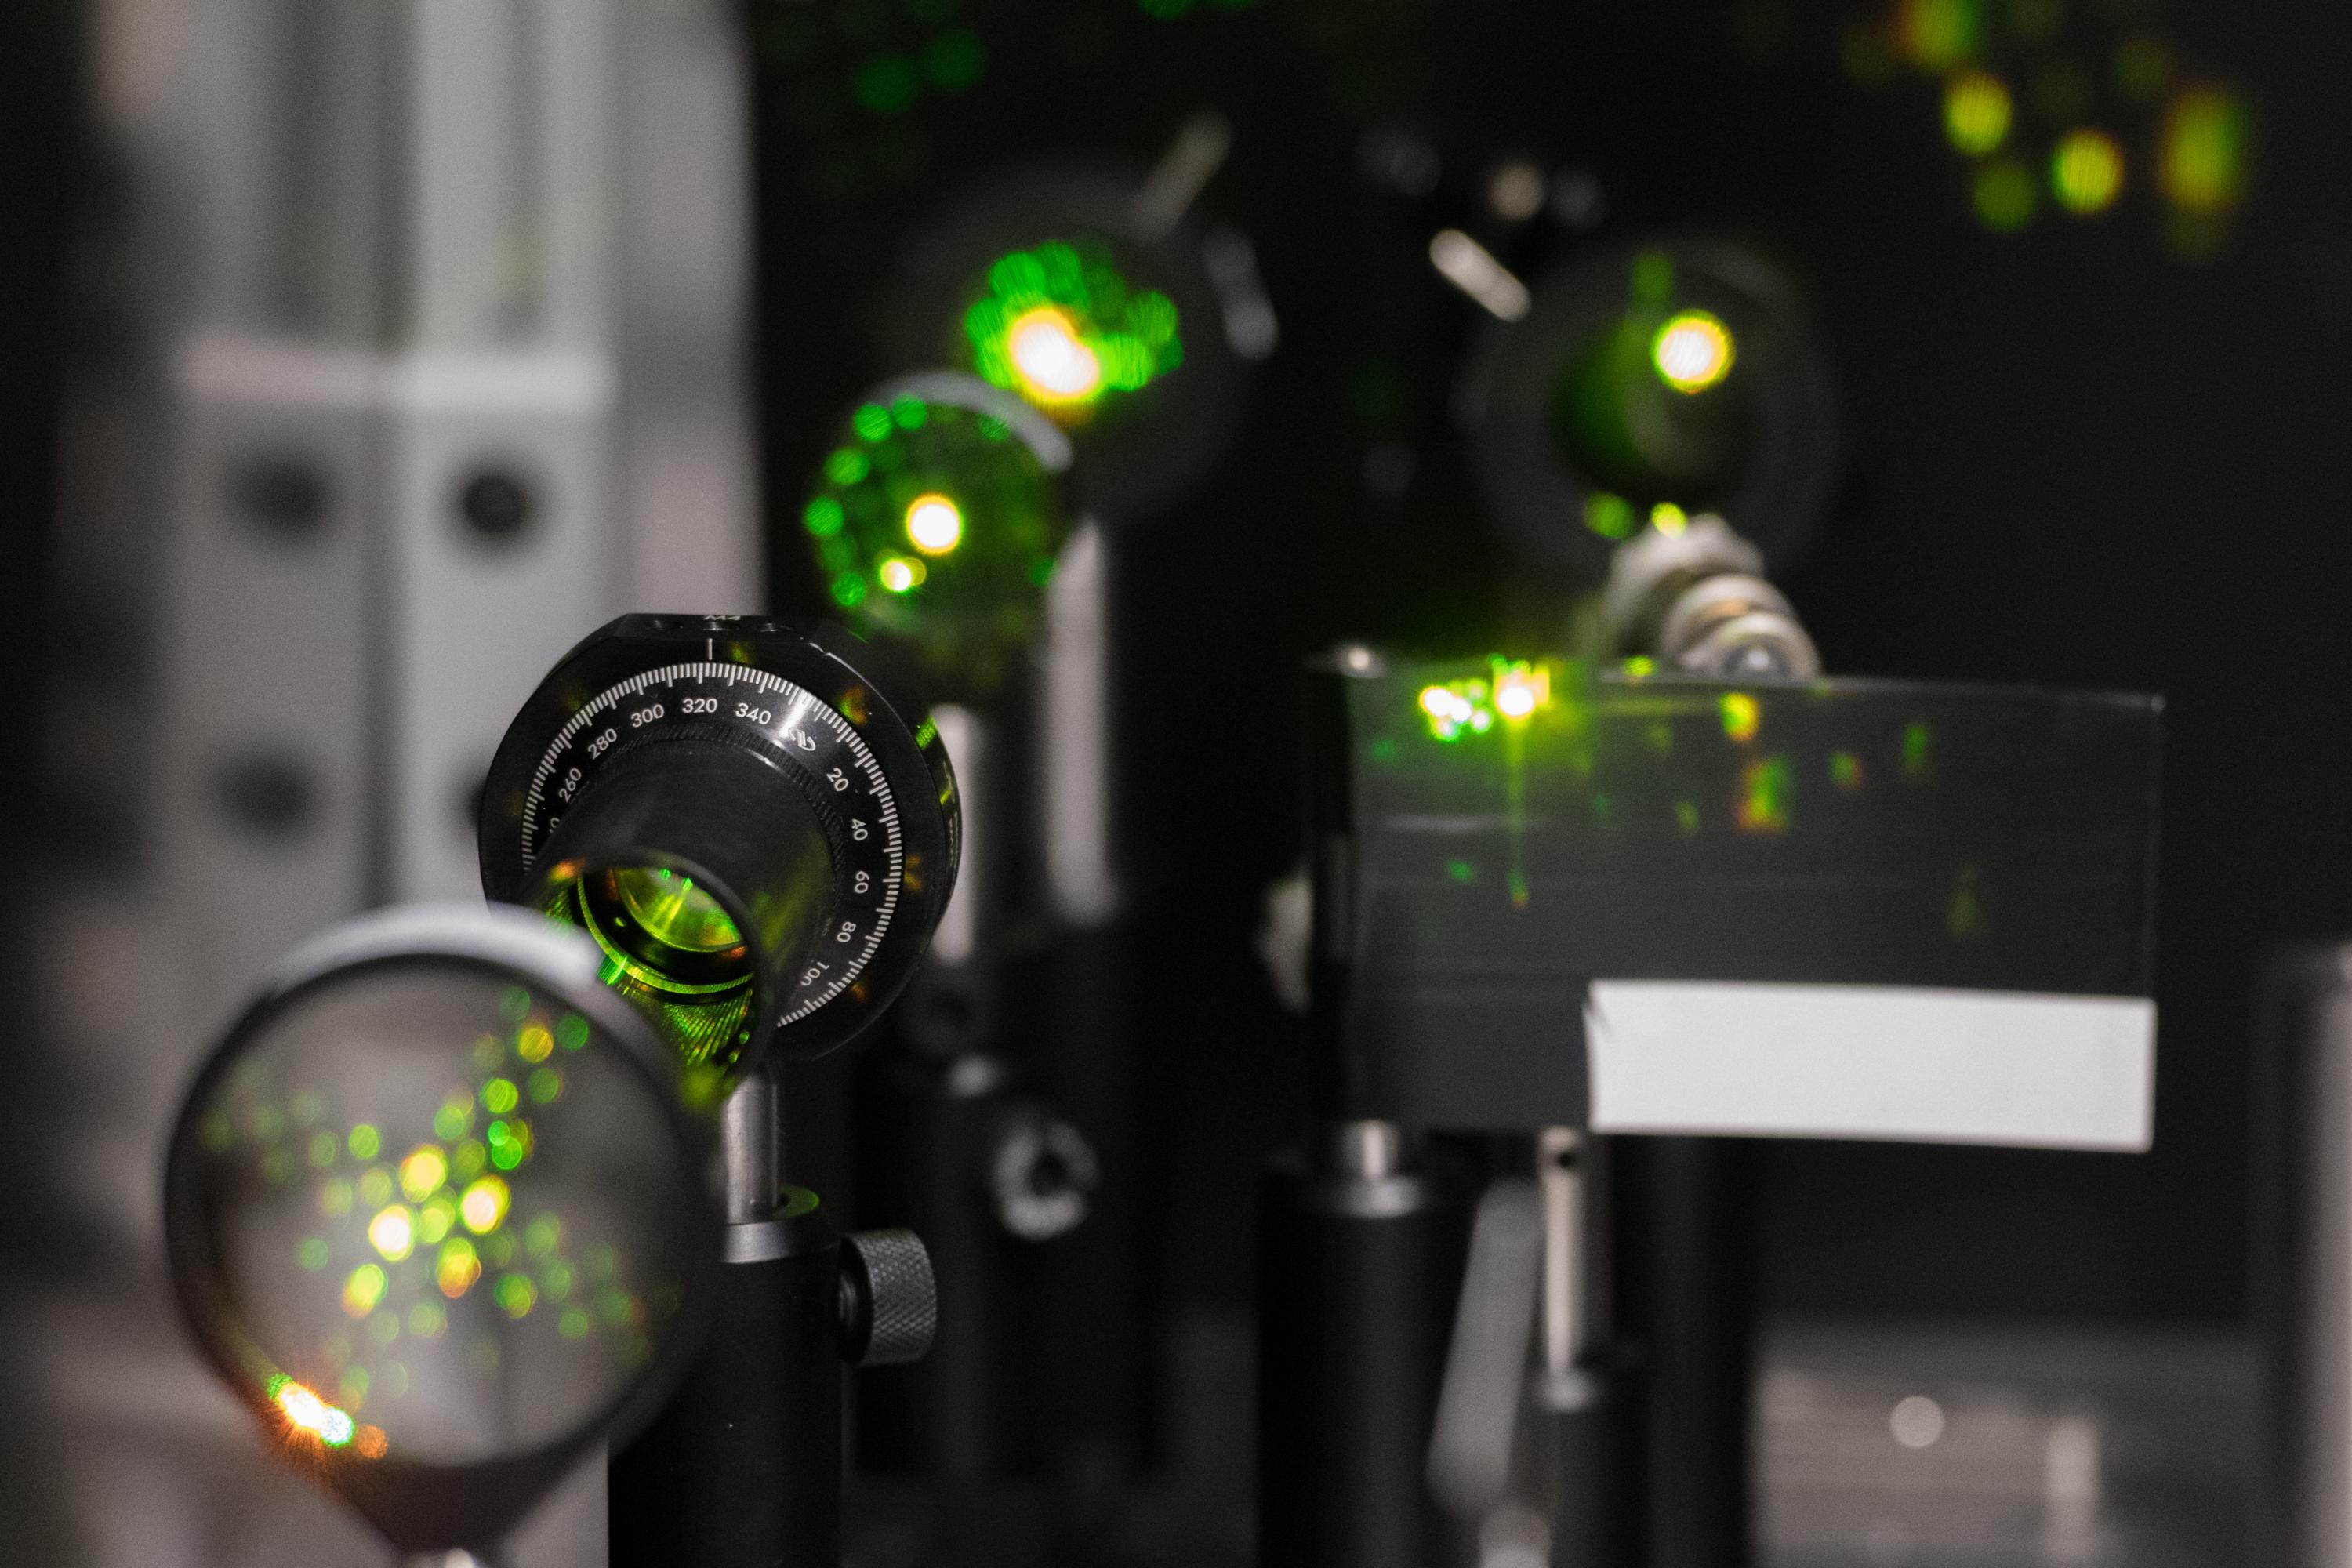 Laser light in the visible range is processed for use in the testing of quantum properties in materials in Carlos Silva's lab at Georgia Tech. Credit: Georgia Tech / Allison Carter